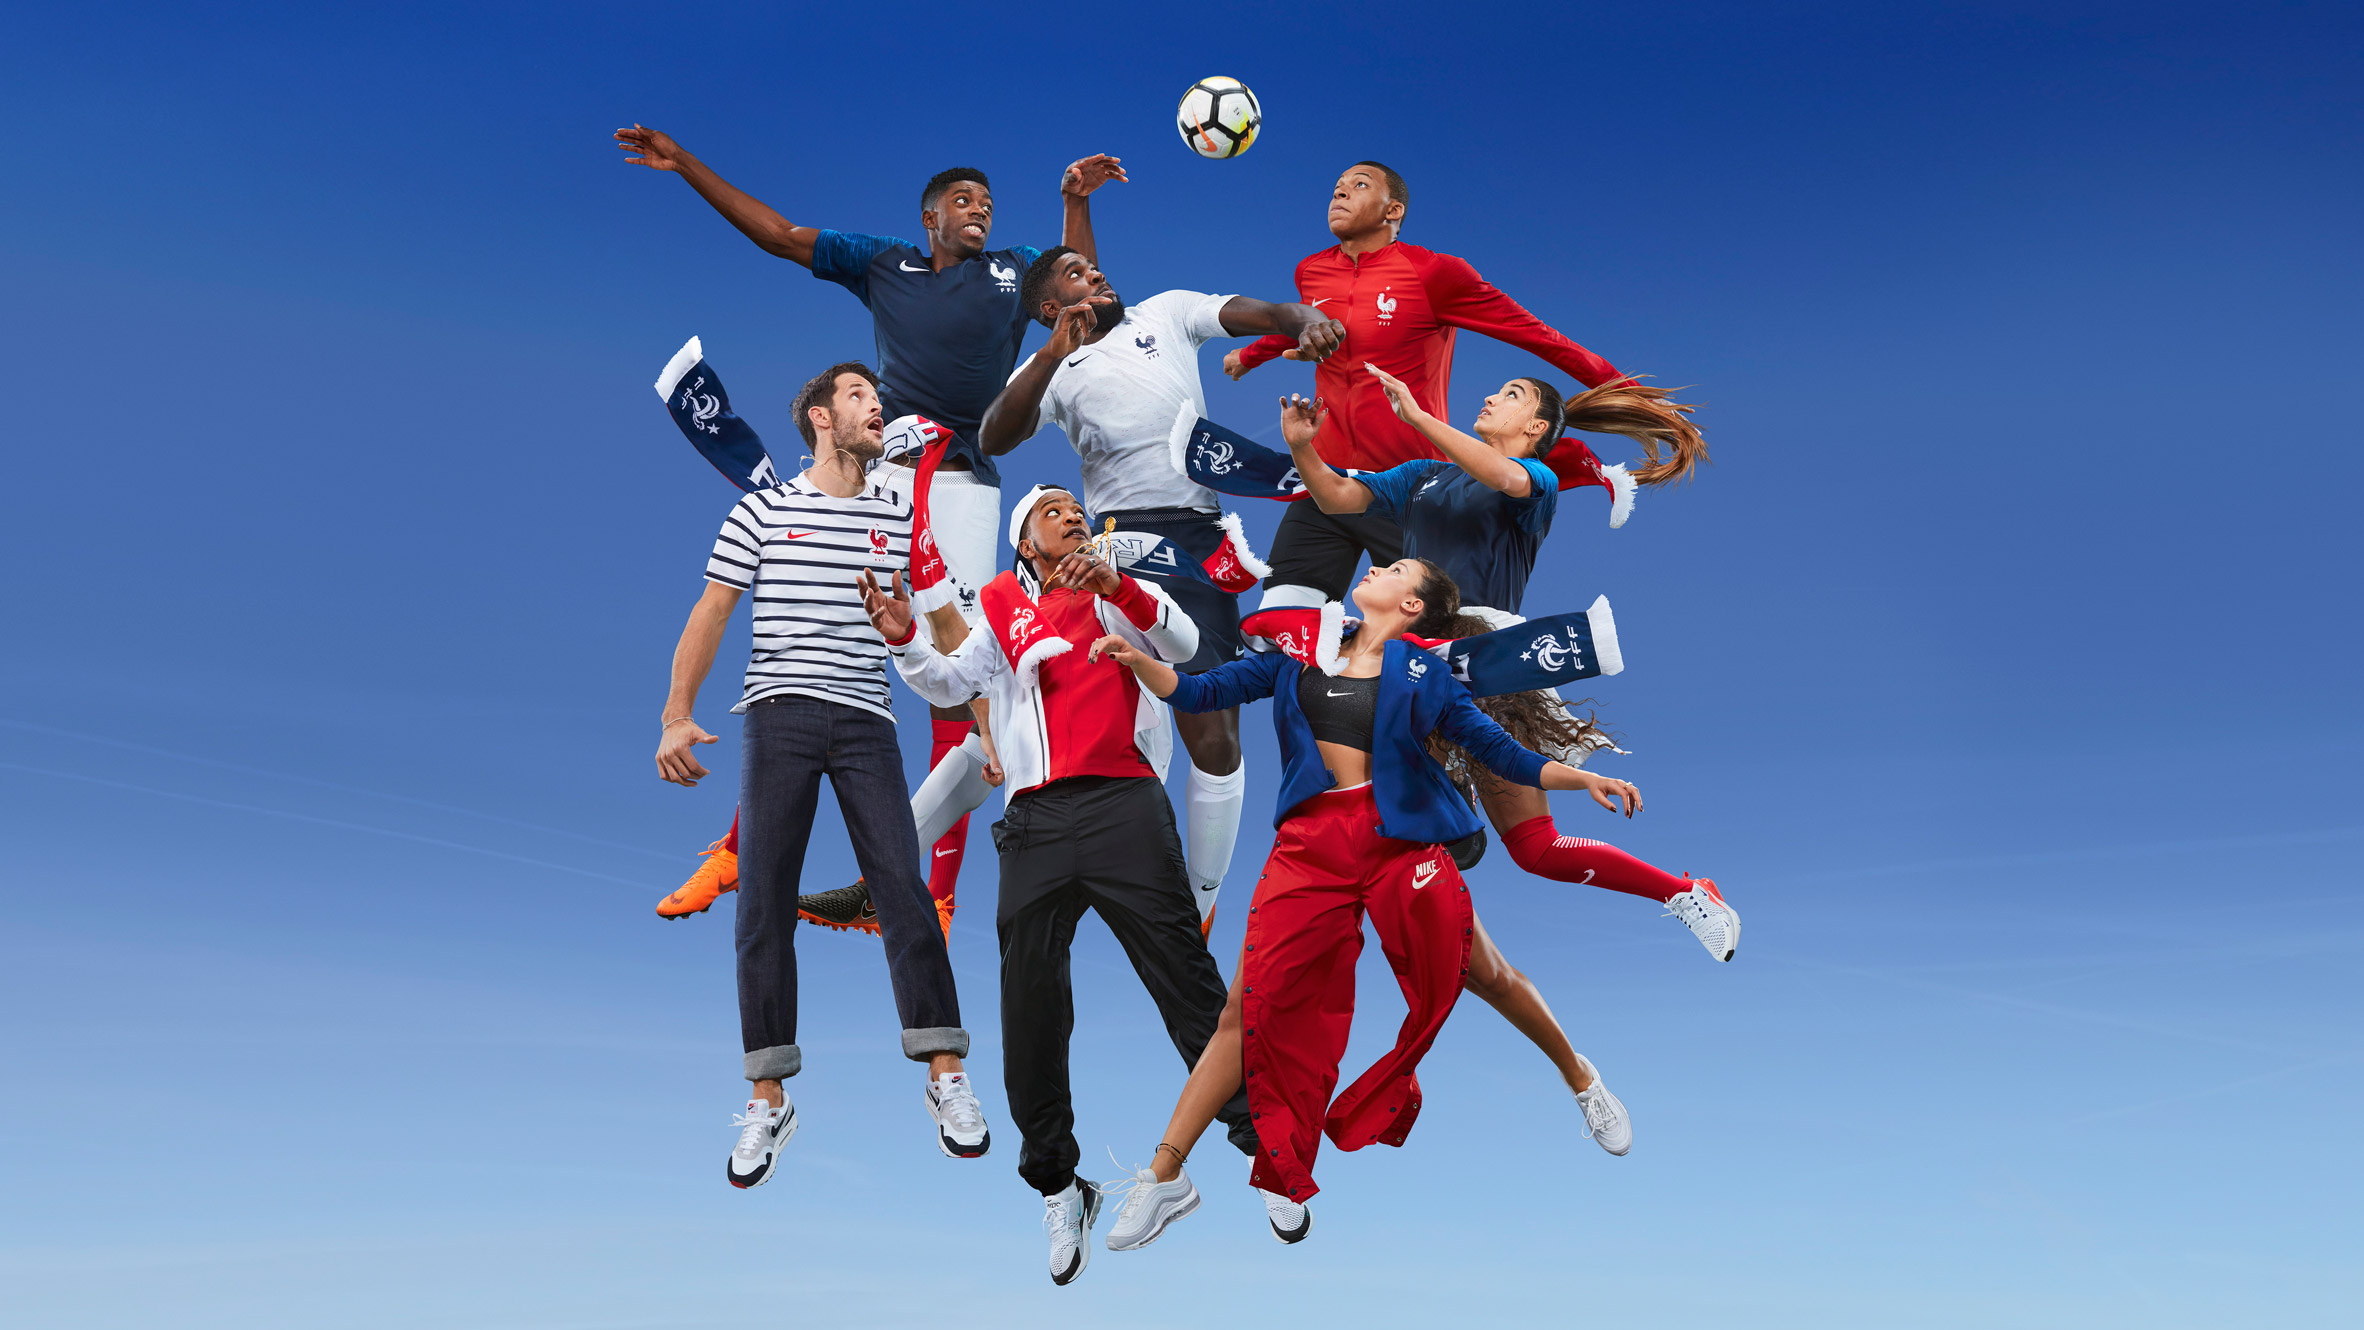 Louis Vuitton unveiled the 2018 FIFA World Cup collection